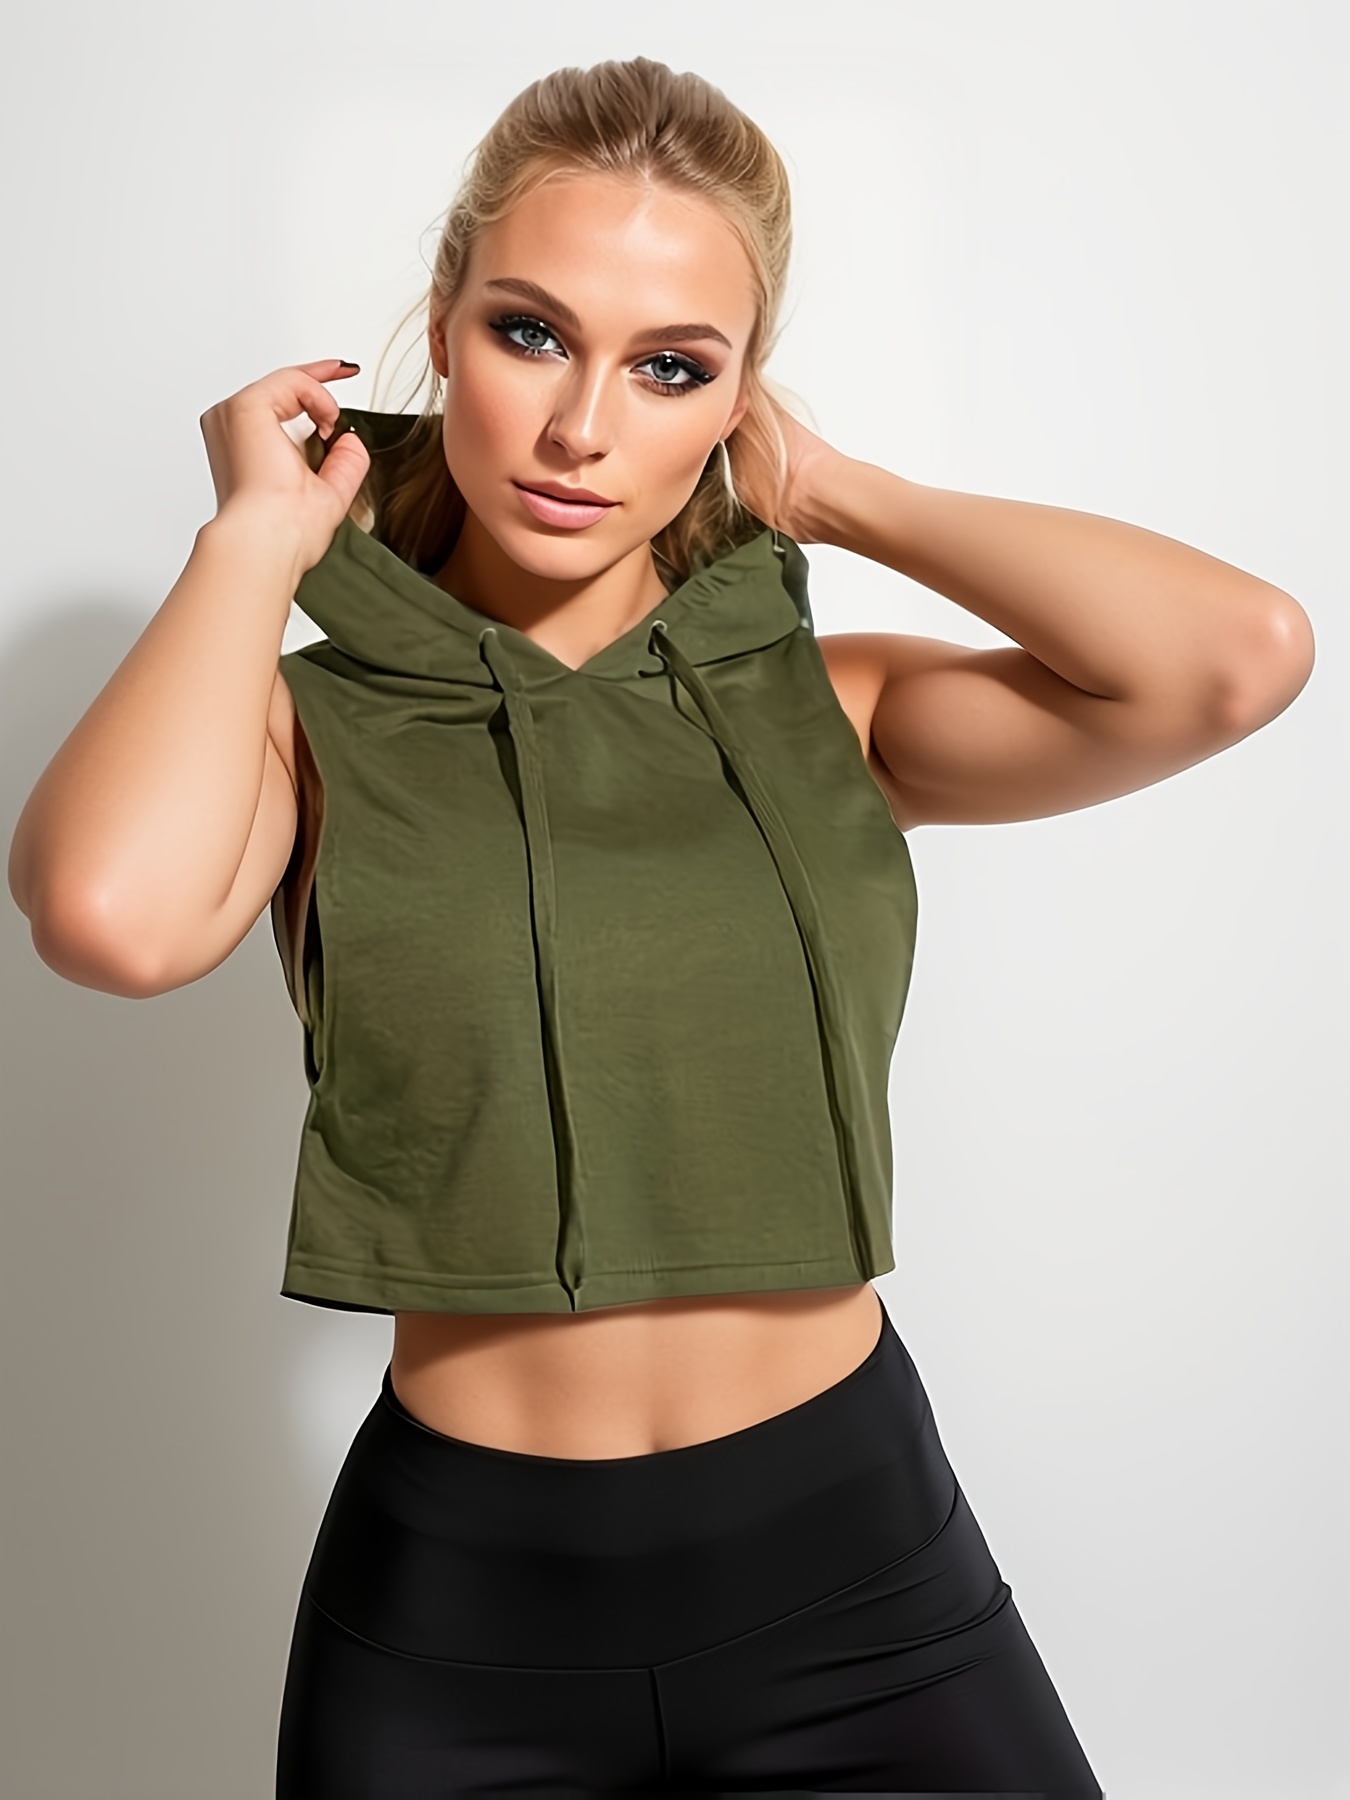  Workout Crop Tops For Women Cropped Tank Tops Muscle Crop  Tank Athletic Shirts Cute Summer Clothes Loose Womens Activewear Tops White  L